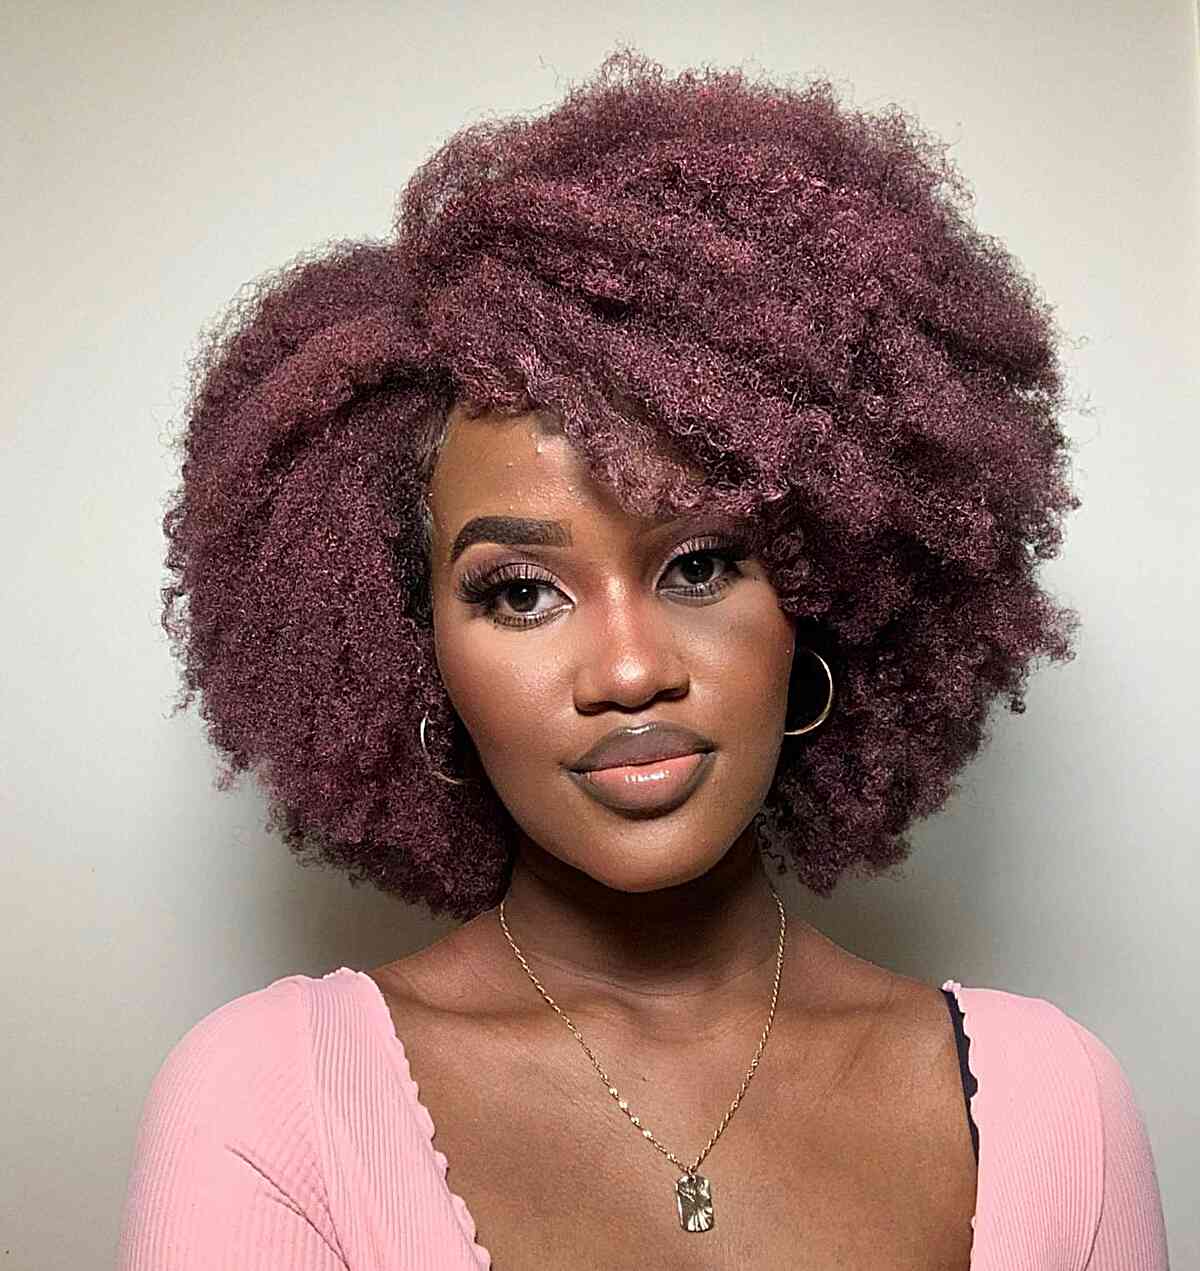 45 Fantastic Crochet Braids To Take Your Natural Hair To The Next Level